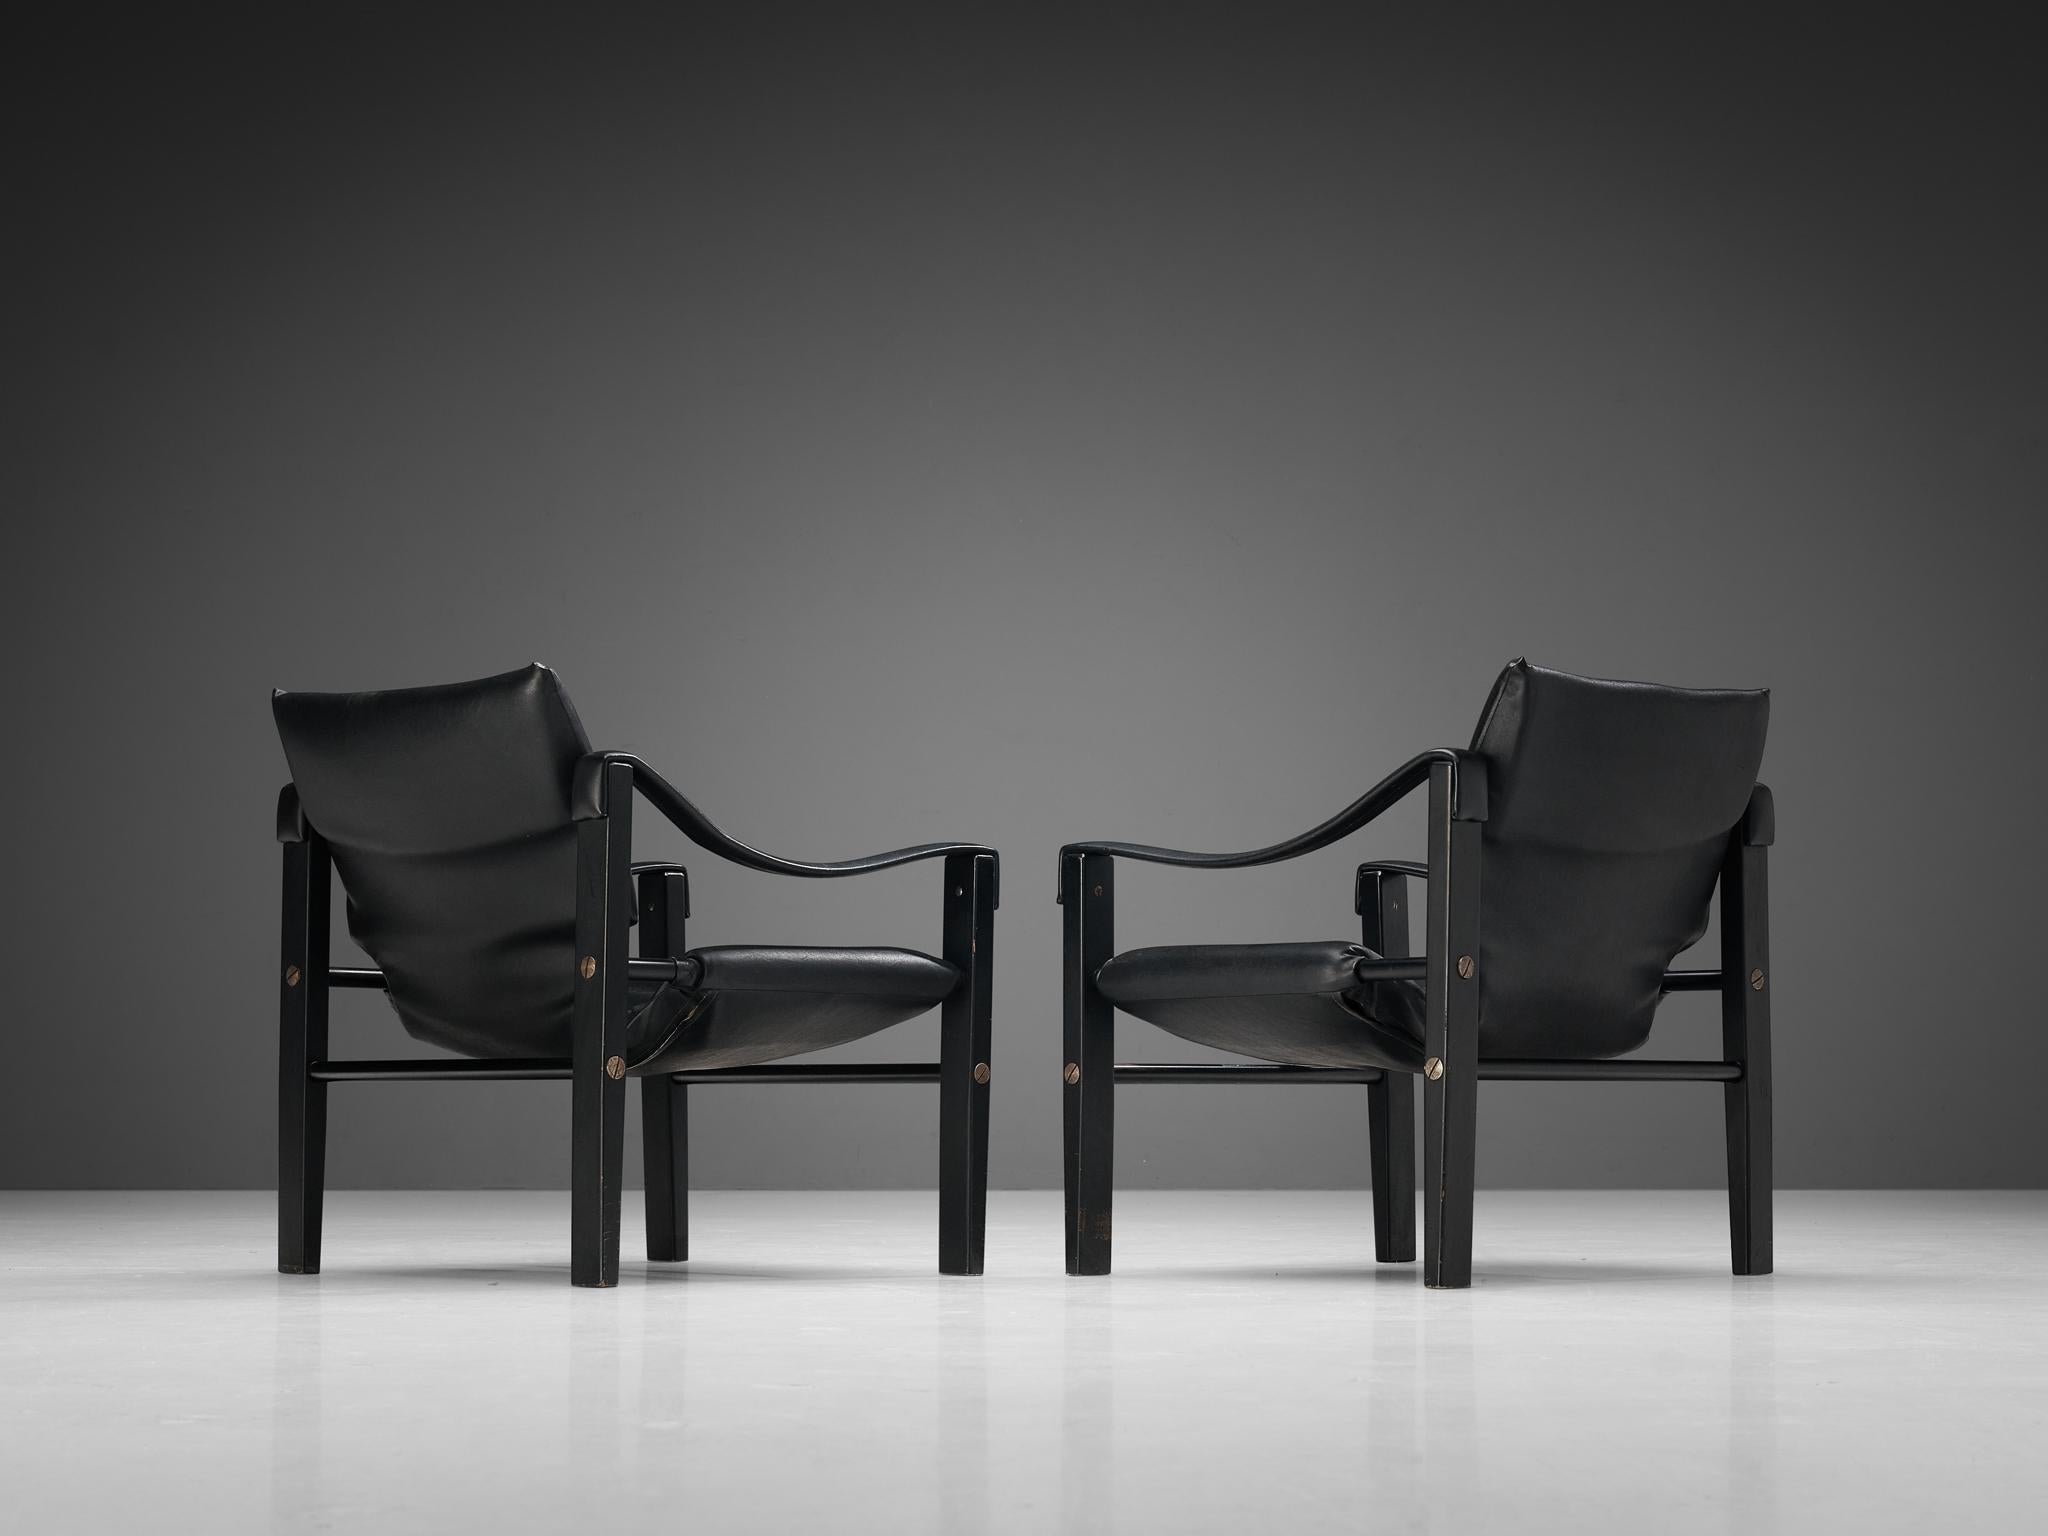 Pair of 'Safari' lounge chairs, vinyl, lacquered wood, metal, United Kingdom, circa. 1965

These well-constructed armchairs have a solid appearance. The frame is made up of four cube-shaped legs and tubular cross connections. As characteristic for